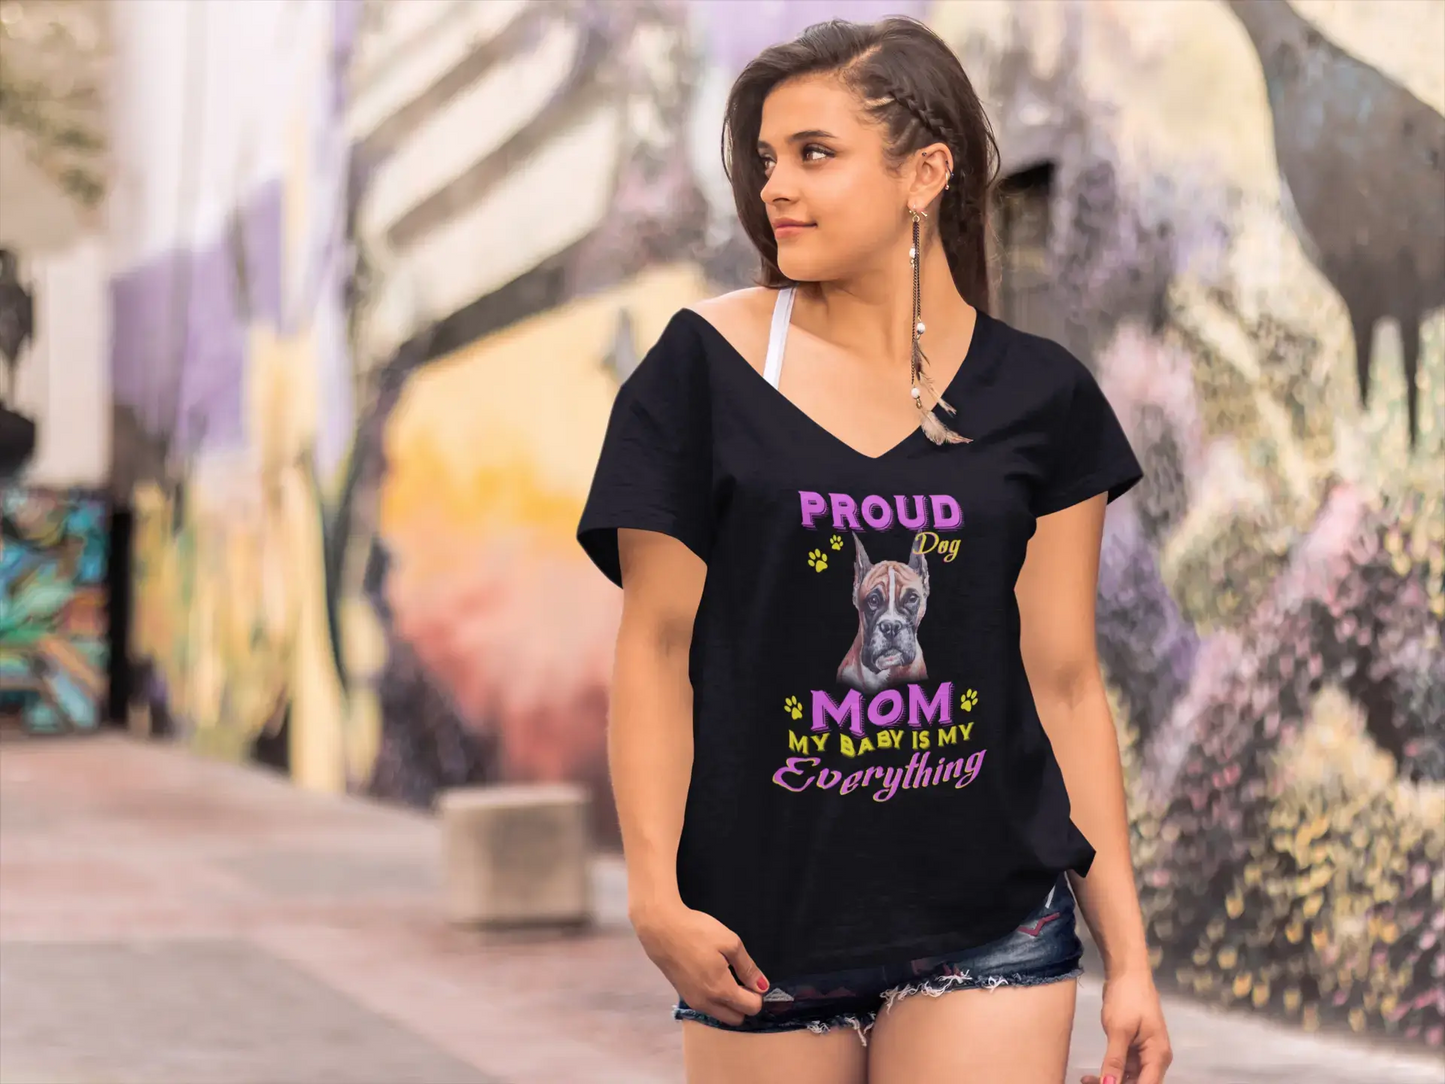 ULTRABASIC Women's T-Shirt Proud Day - Boxer Dog Mom - My Baby is My Everything